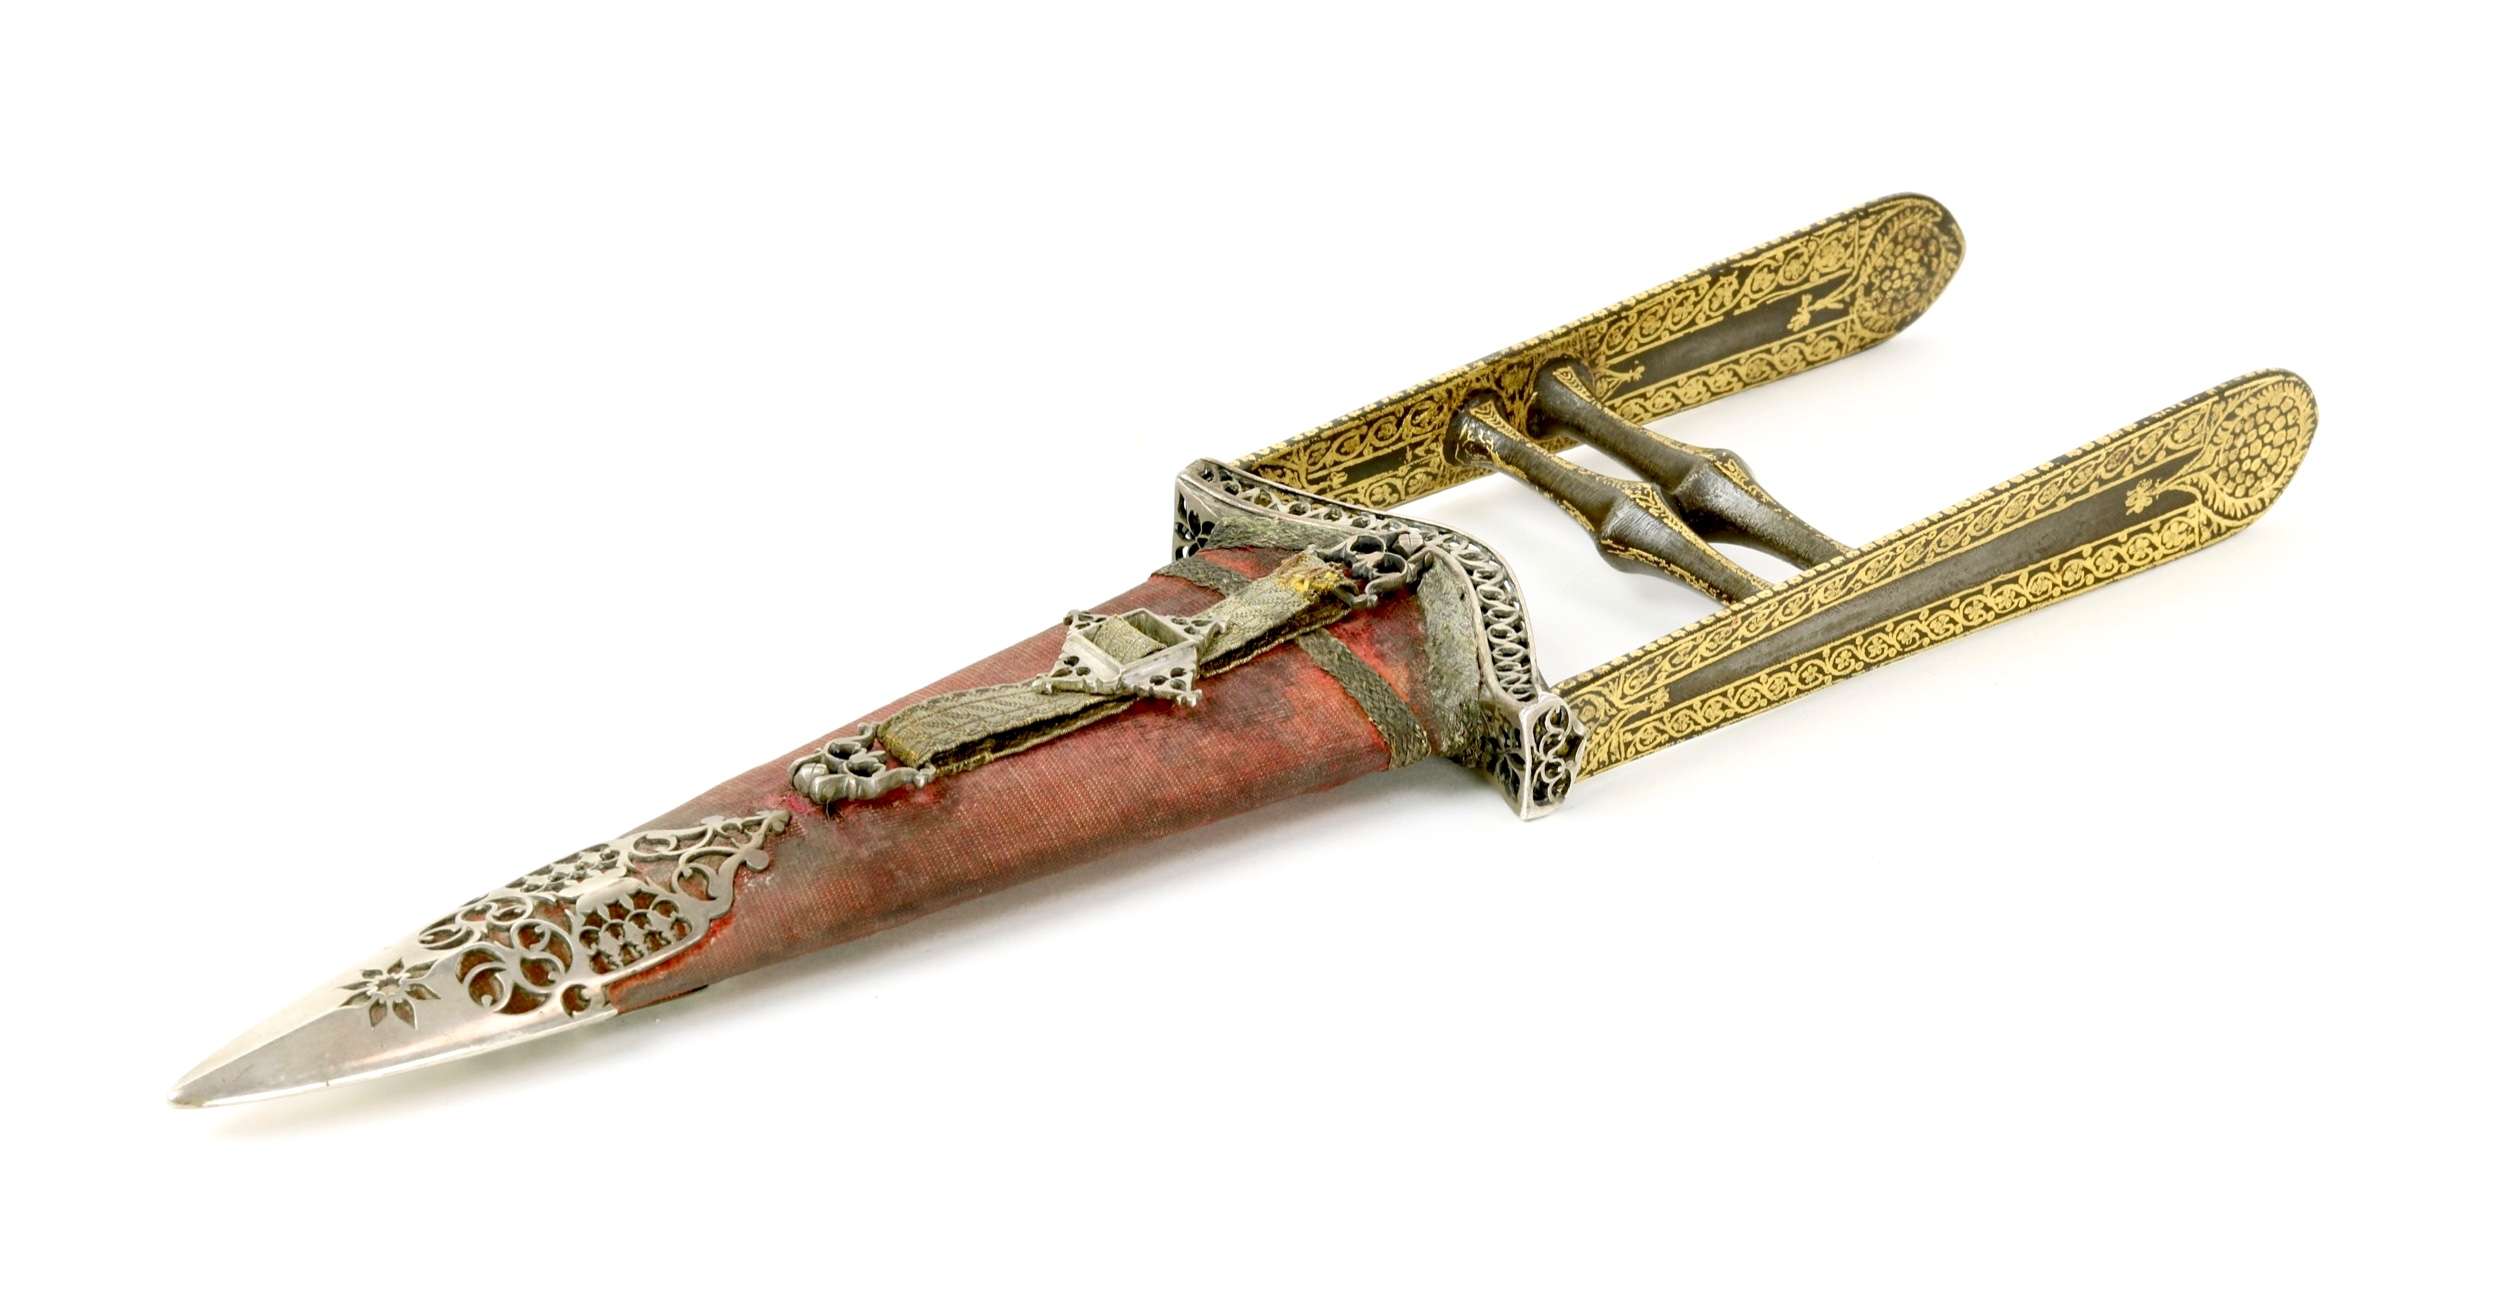 A dated katar from Sindh